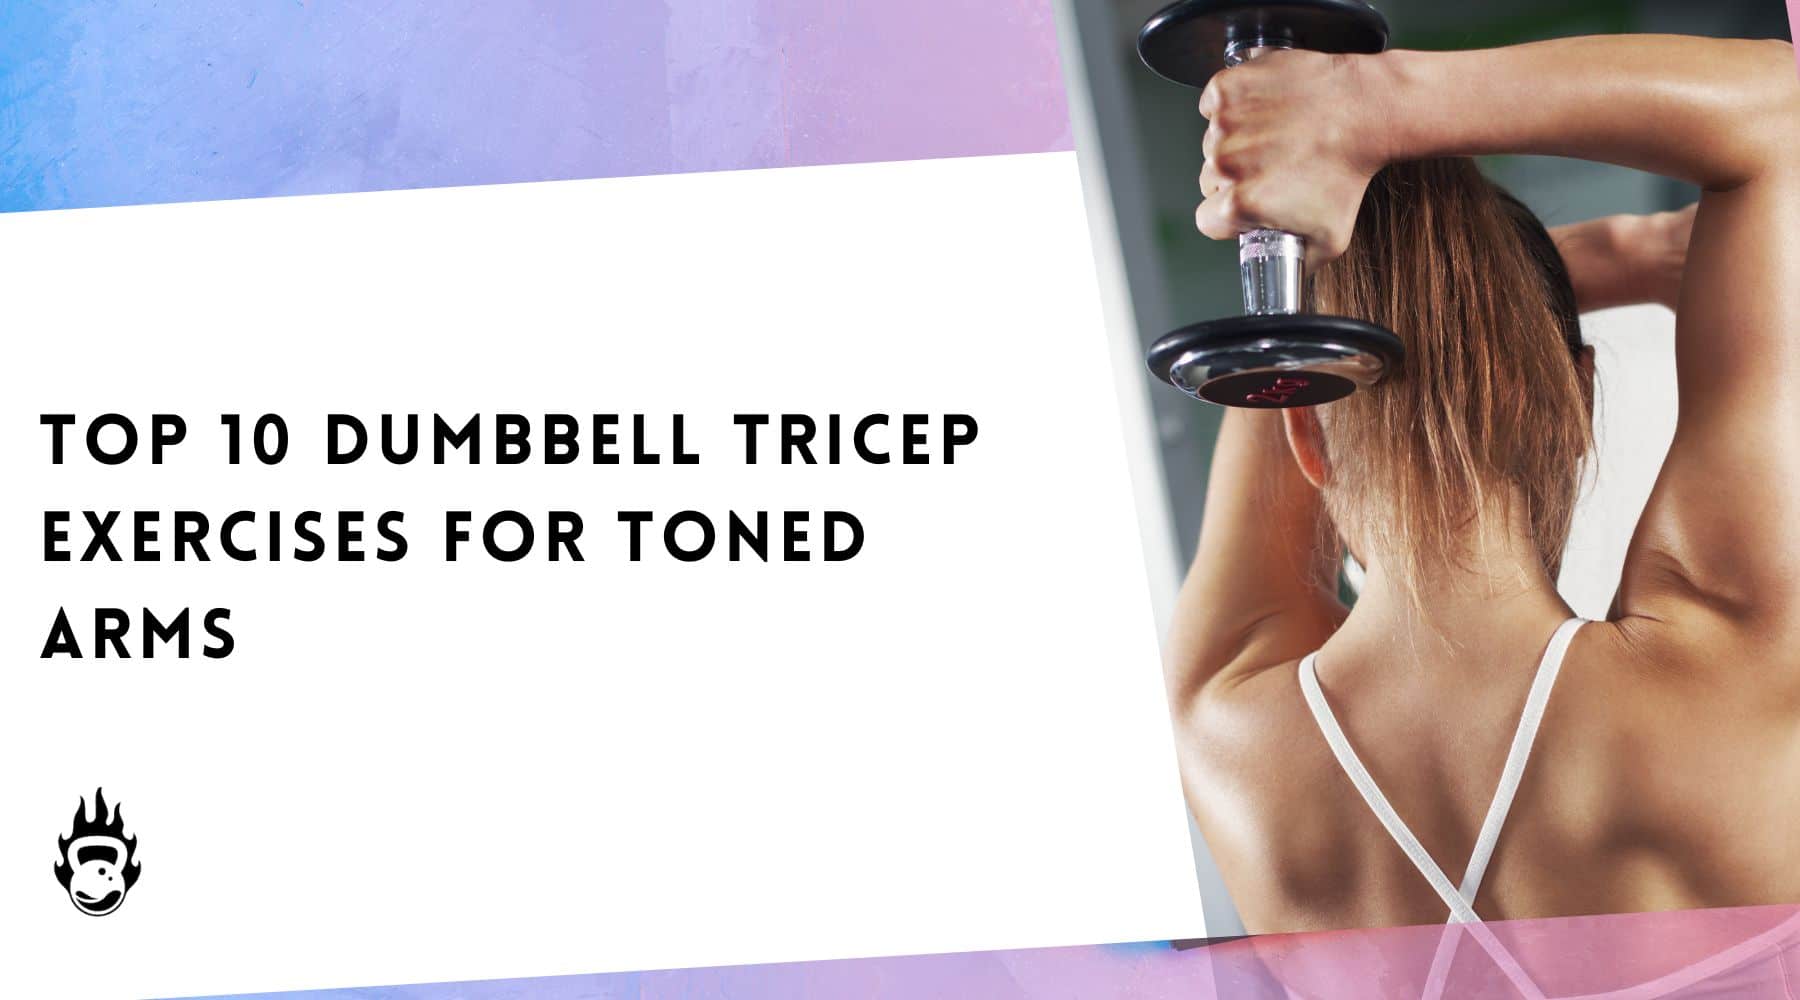 Top 10 Dumbbell Tricep Exercises For Toned Arms